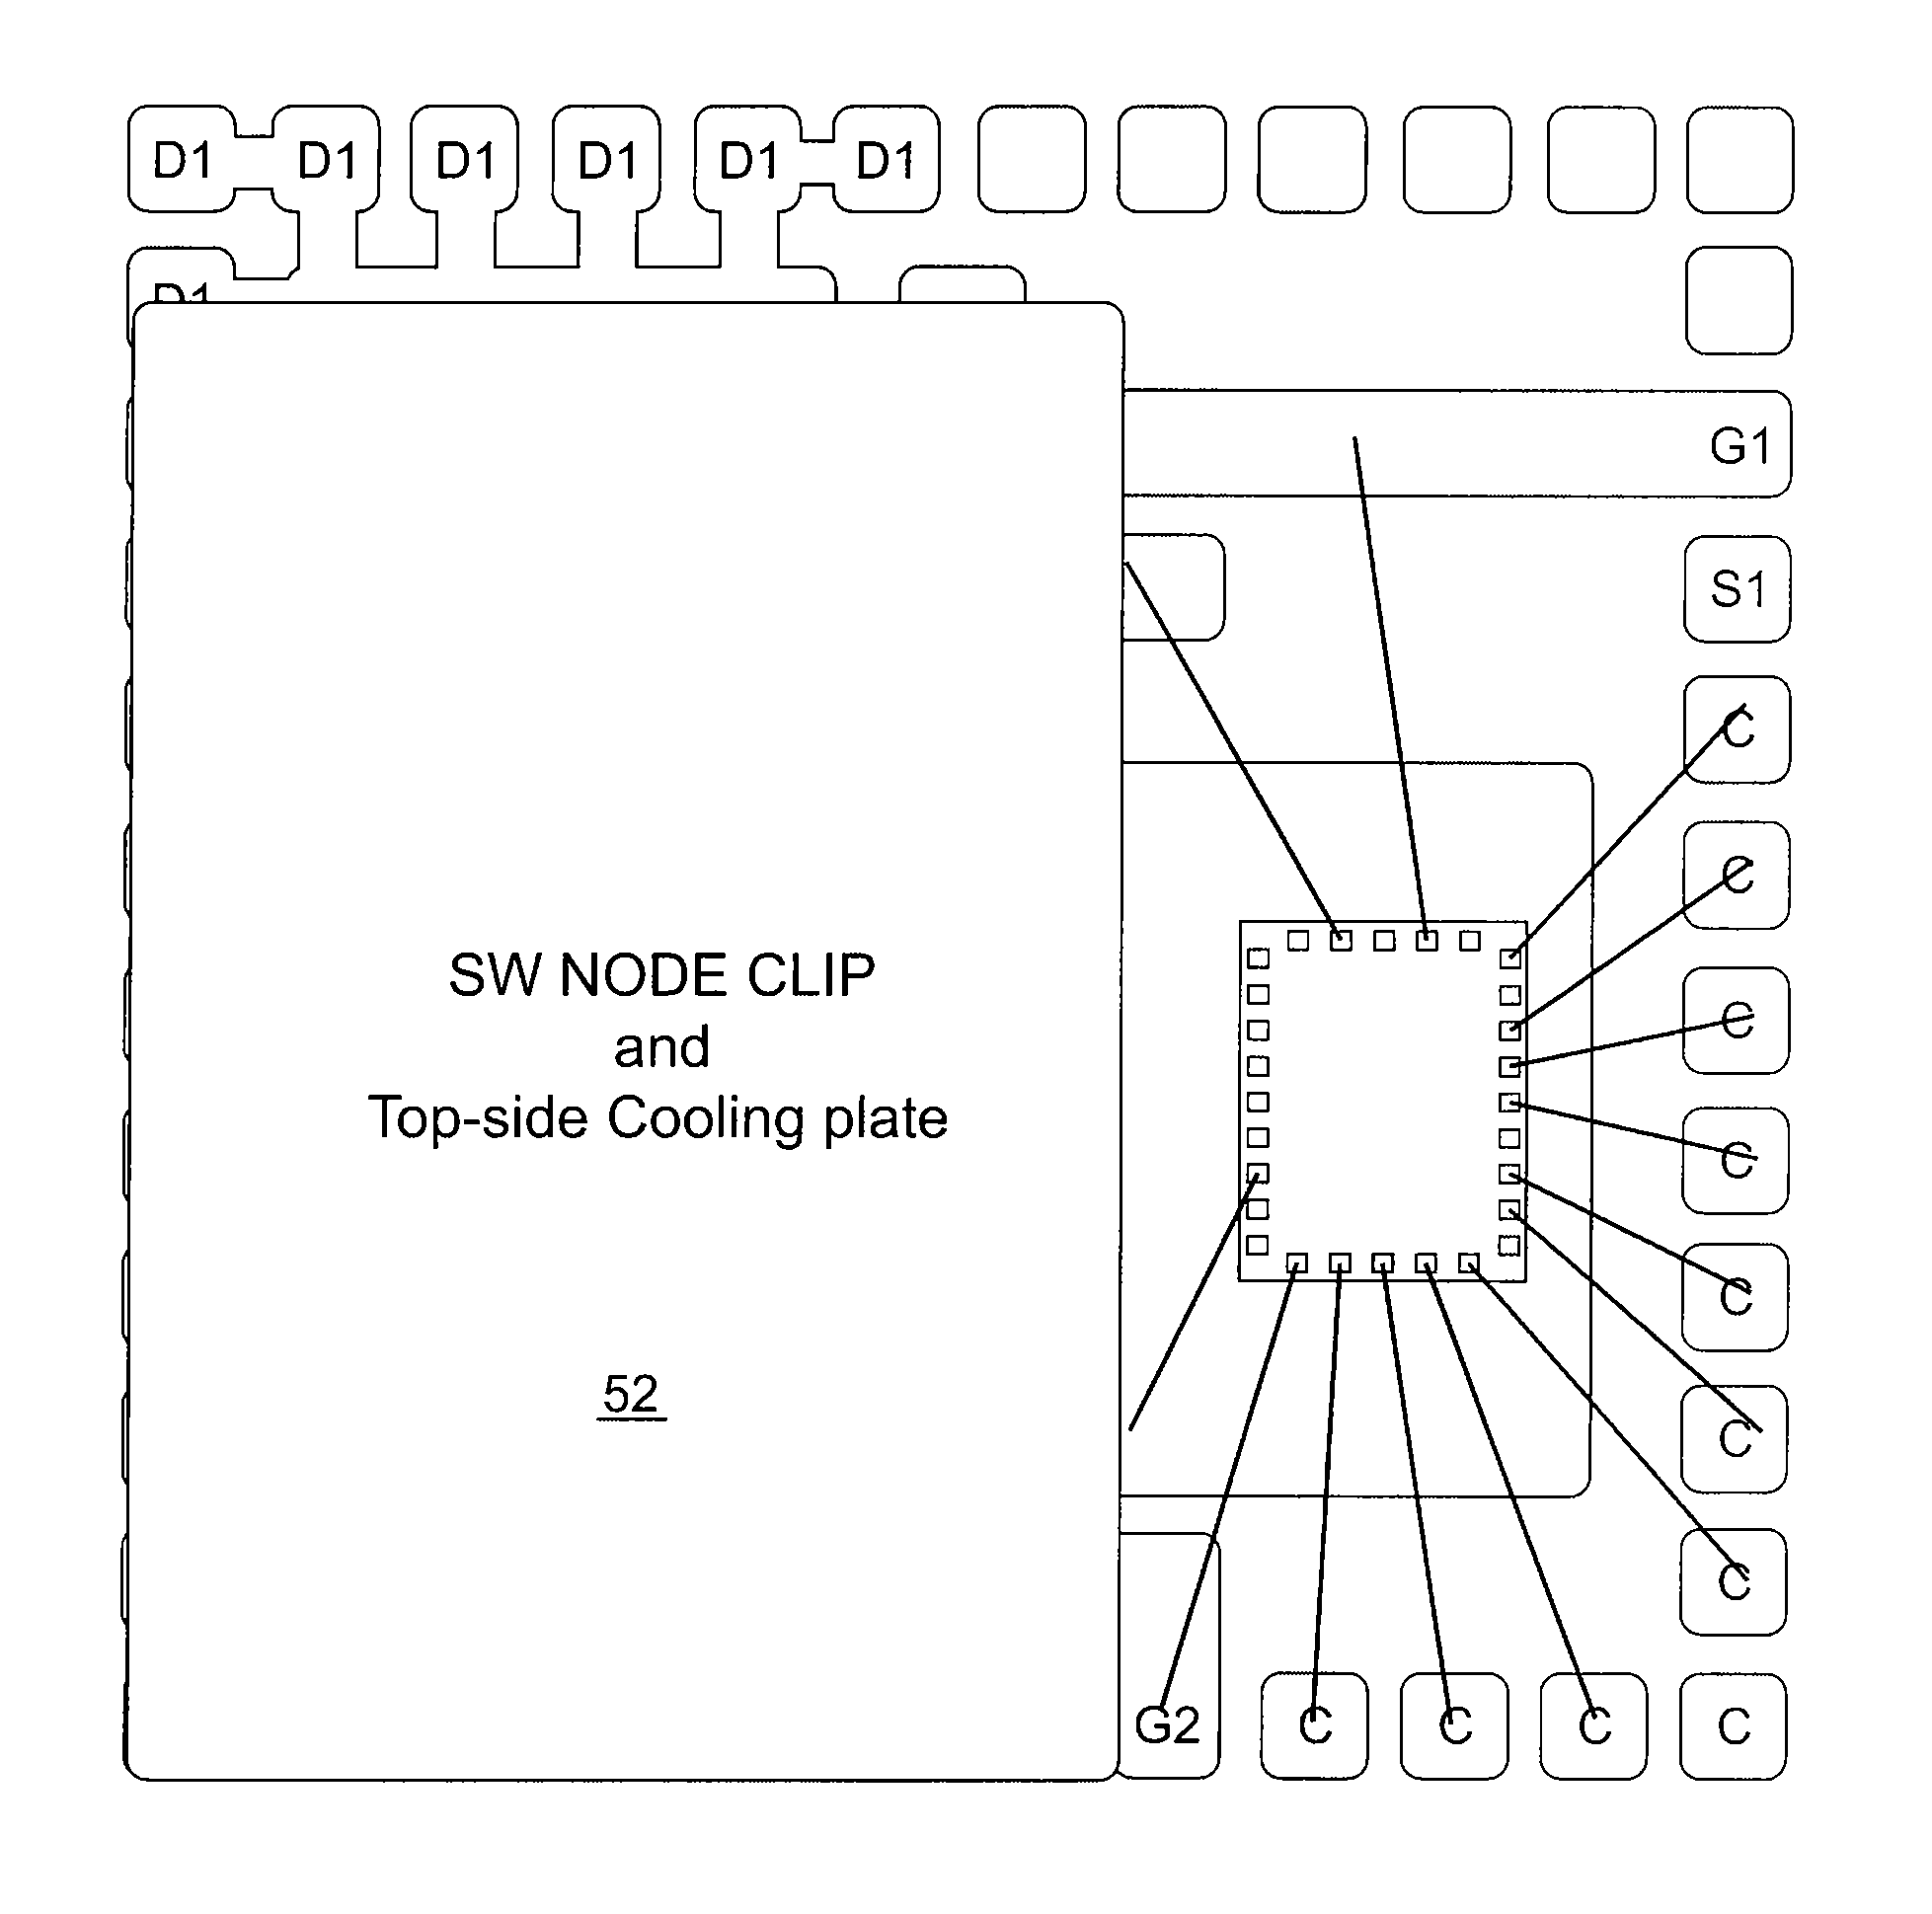 Semiconductor die package including multiple dies and a common node structure